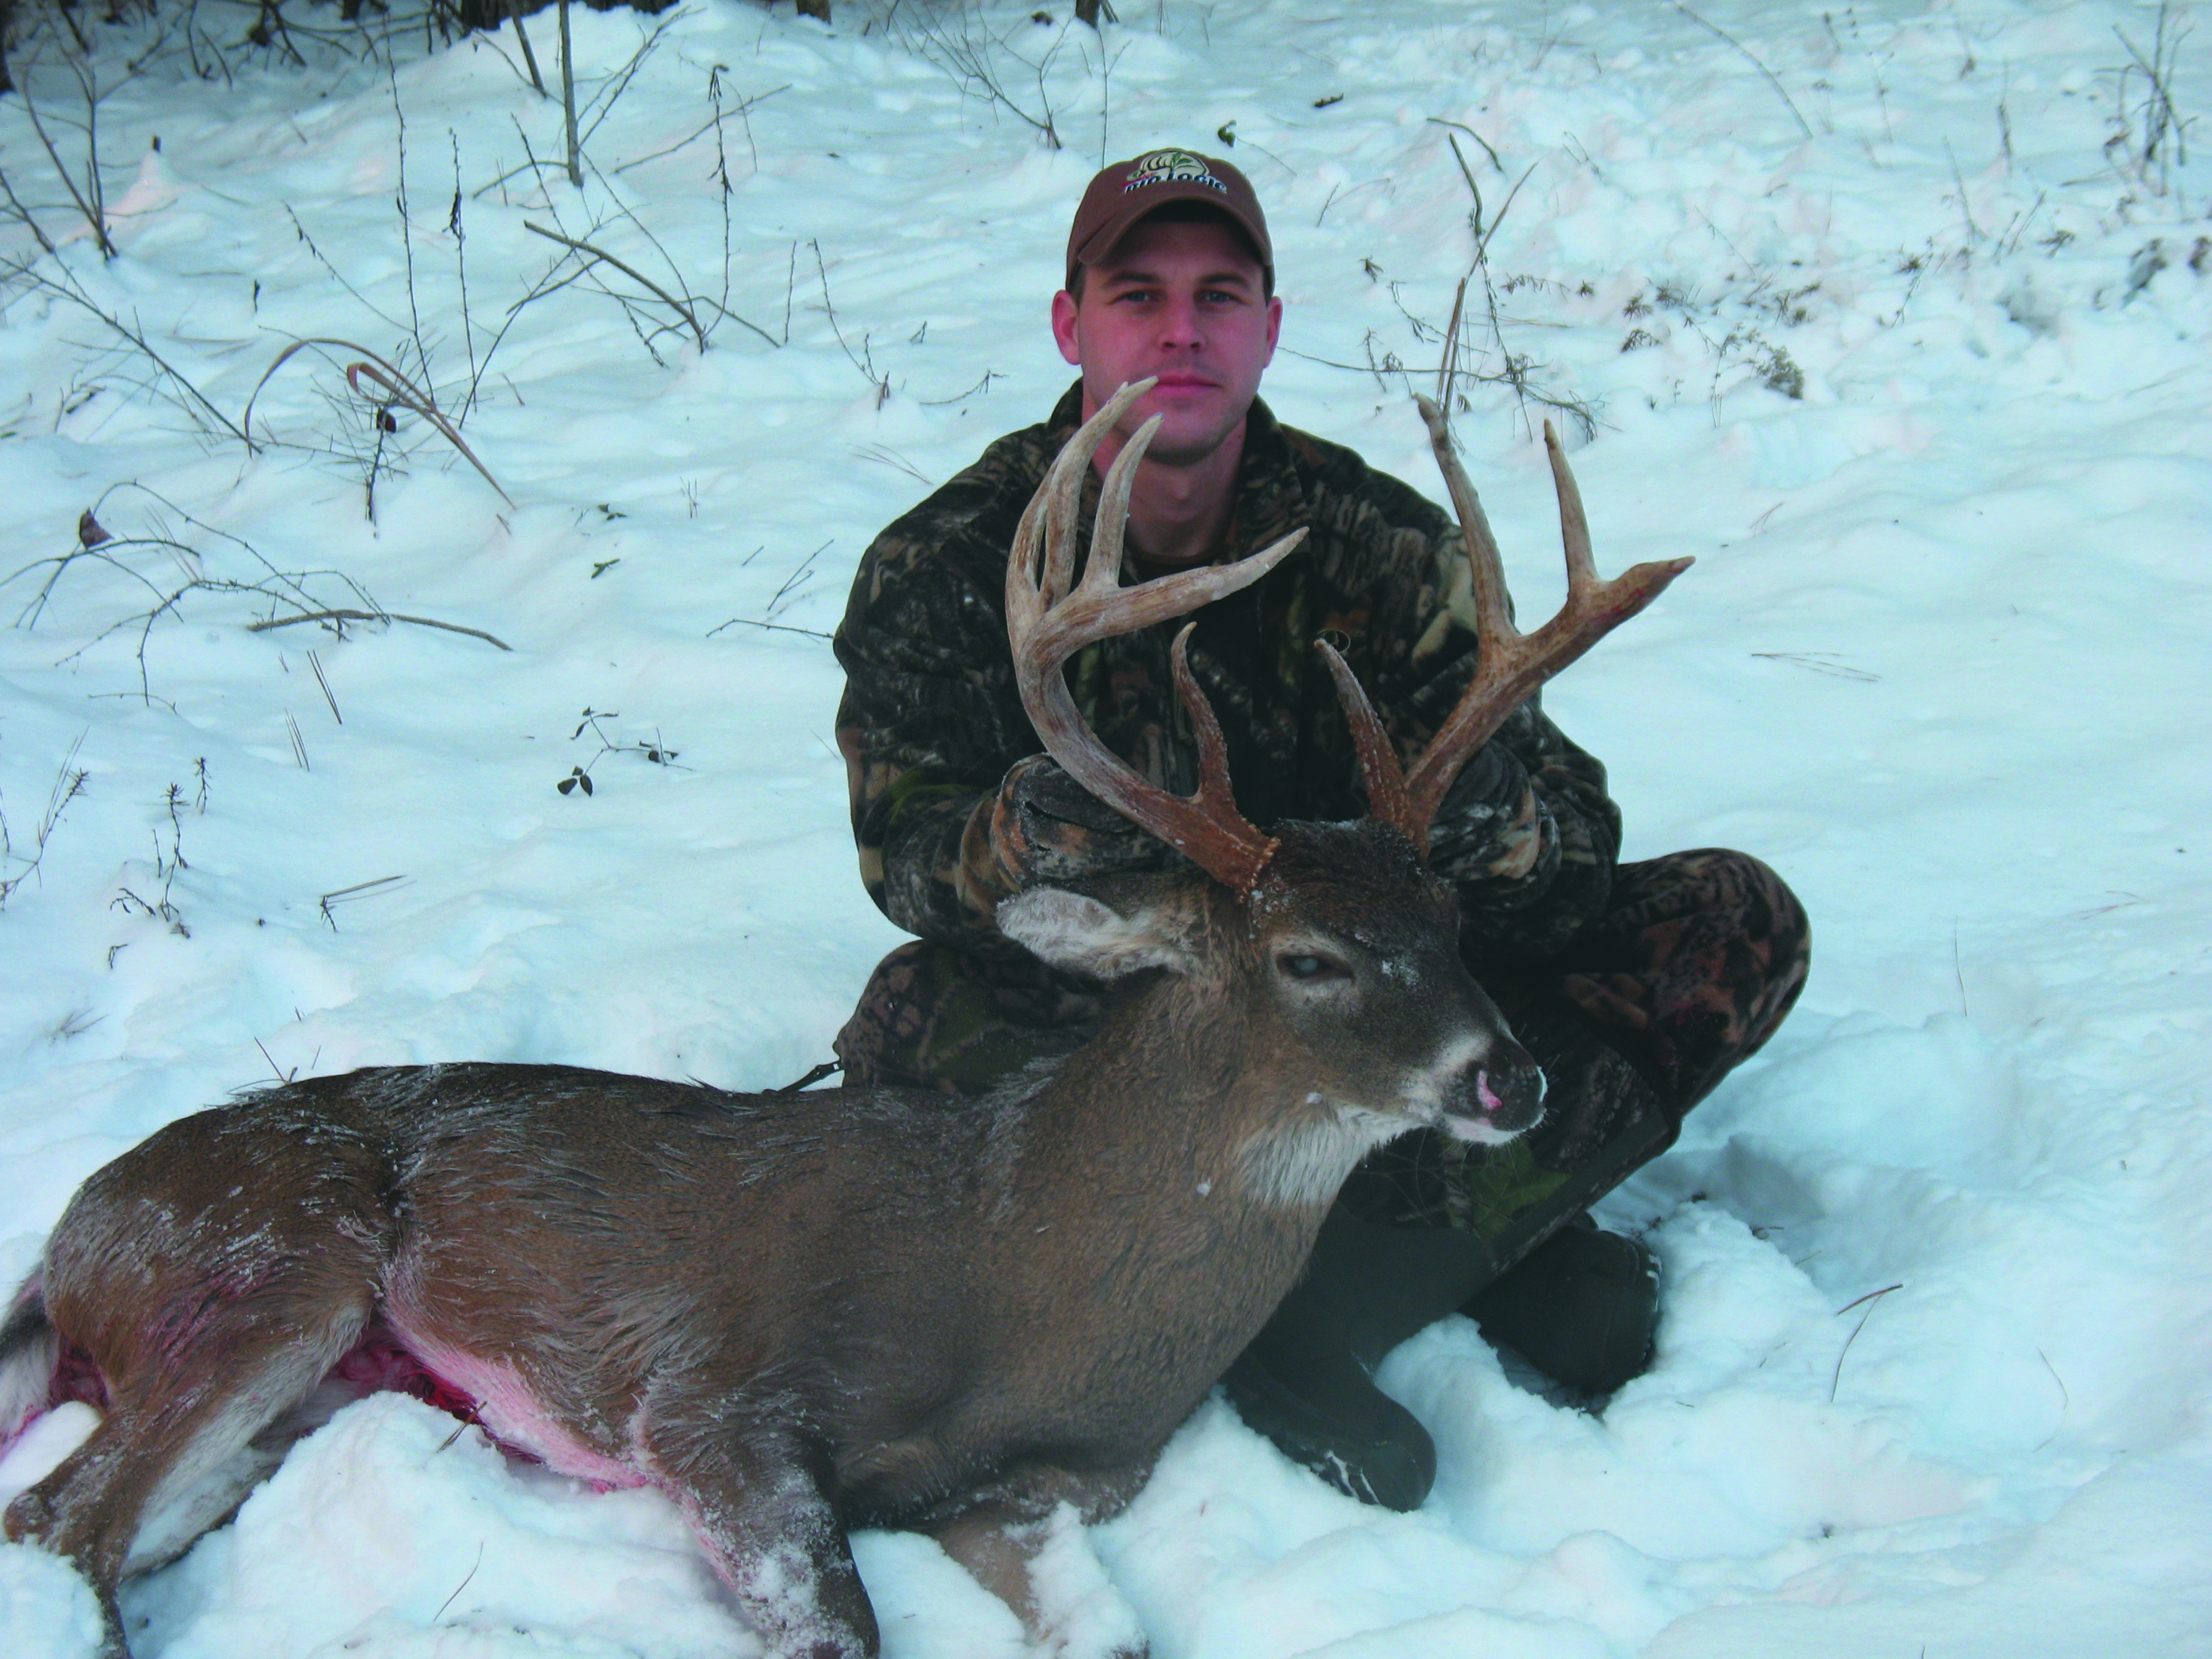 Some key tips to recovering your deer is to give them time to expire and watch where you hit them.